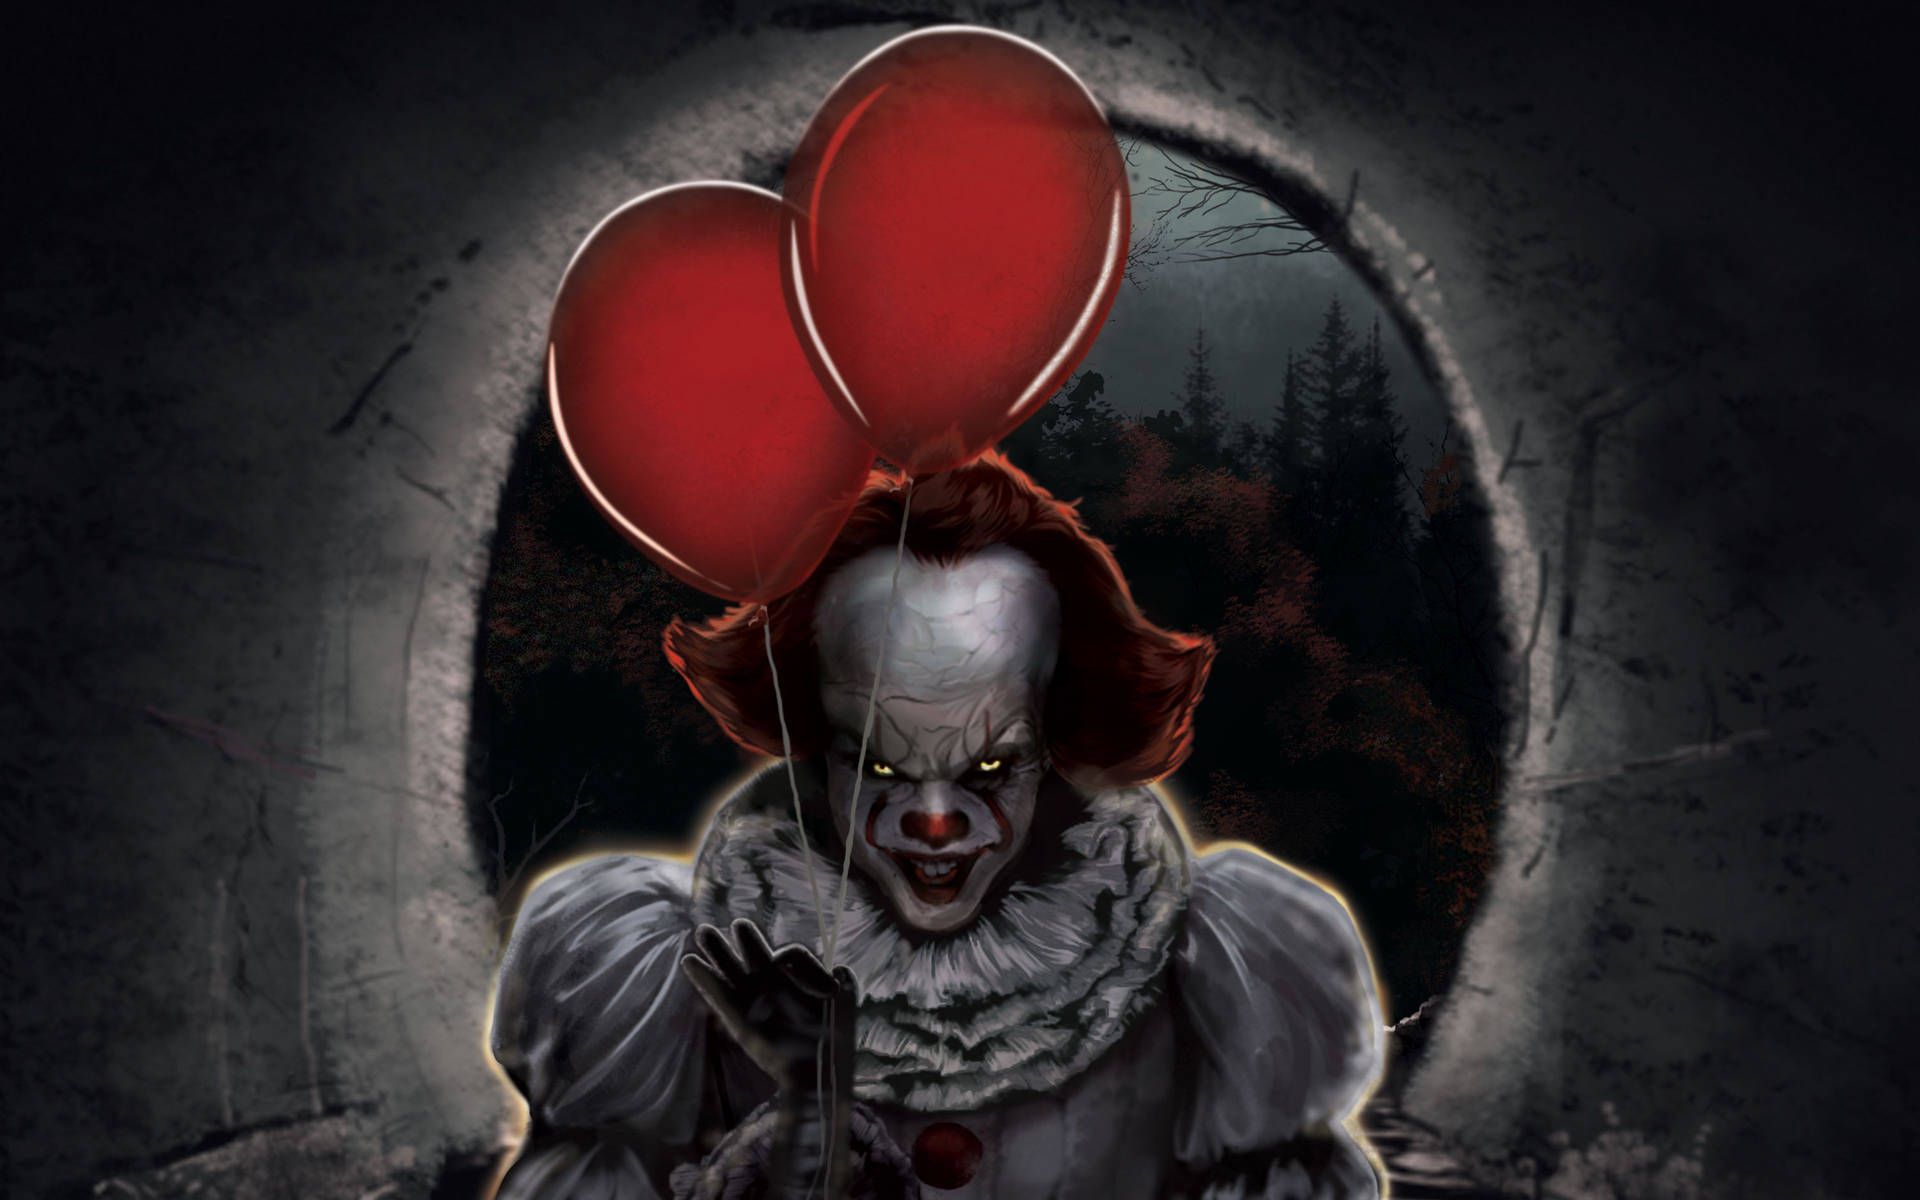 Free Pennywise Wallpaper Downloads, Pennywise Wallpaper for FREE